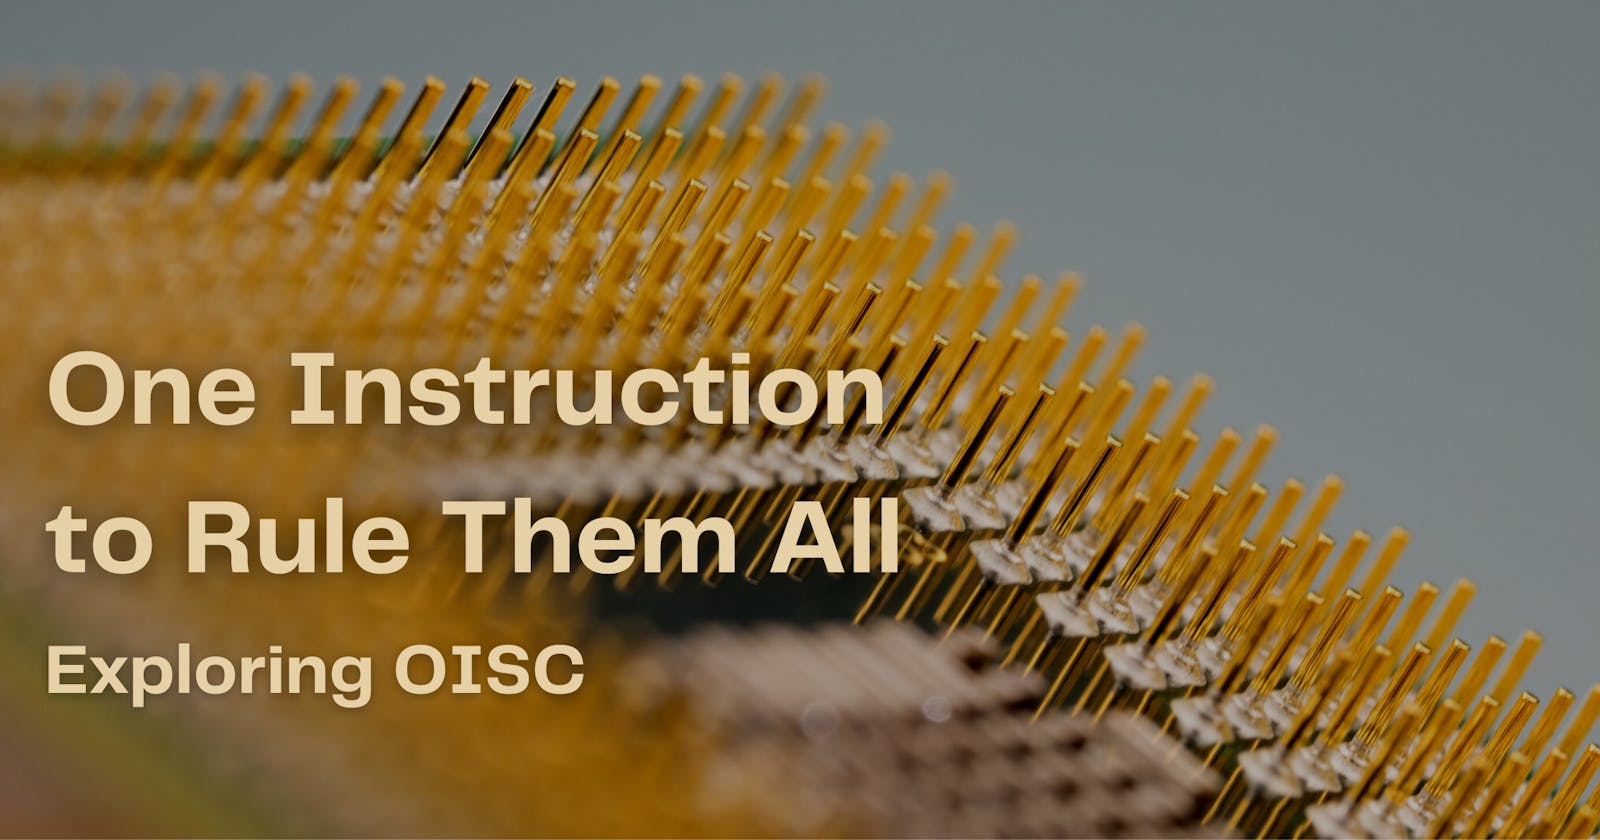 One Instruction to Rule Them All: Exploring OISC